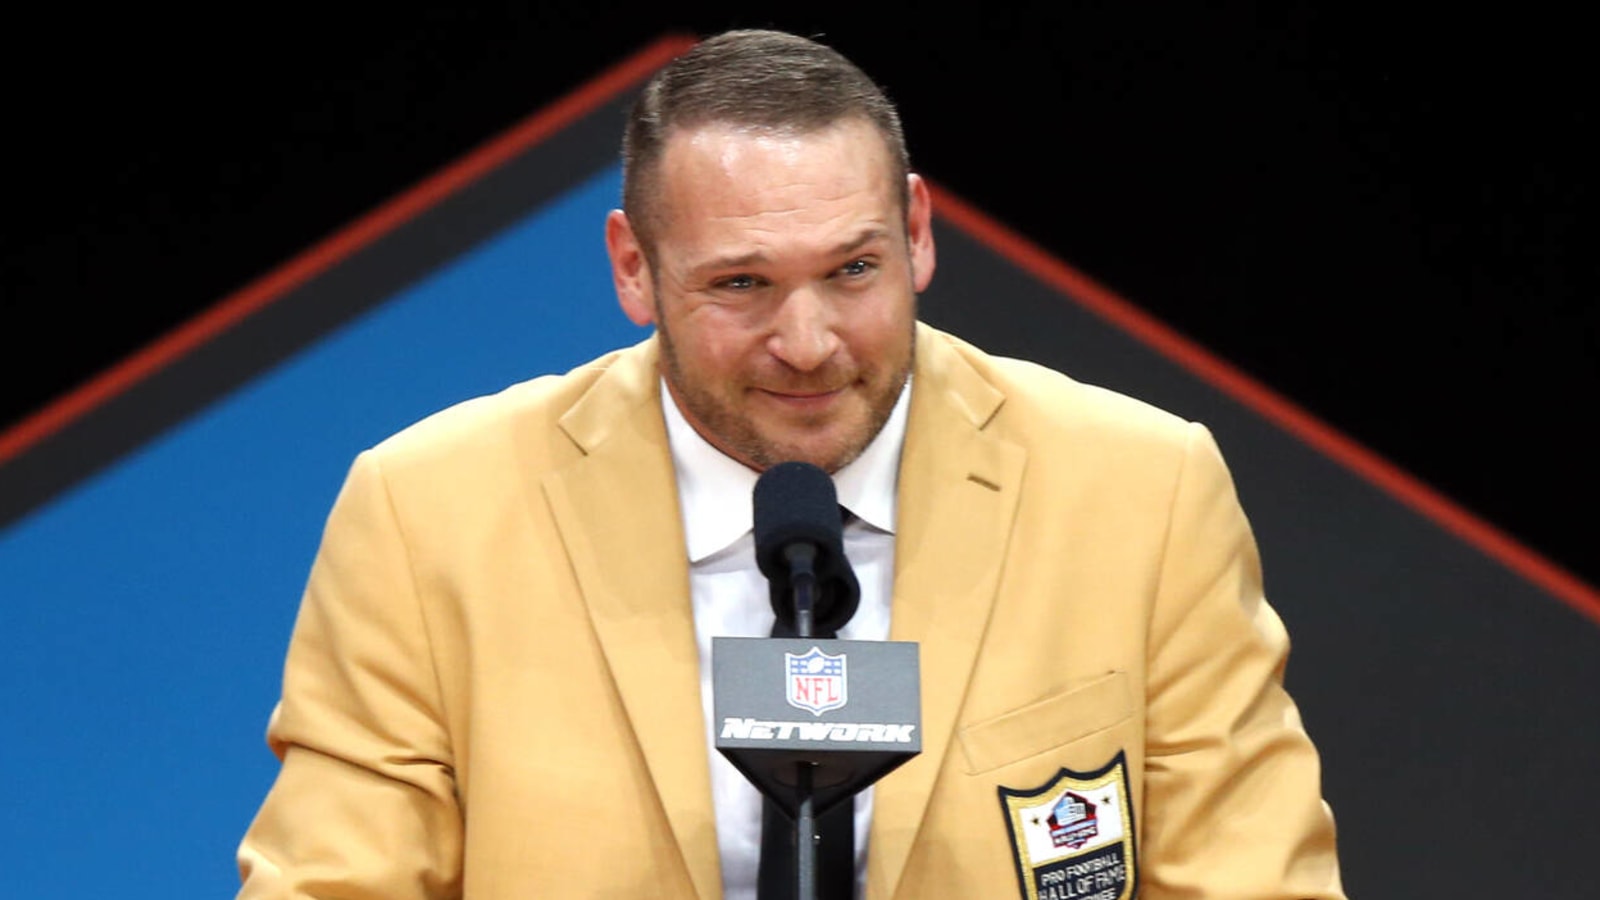 Brian Urlacher shares which NFL QB was the toughest to face